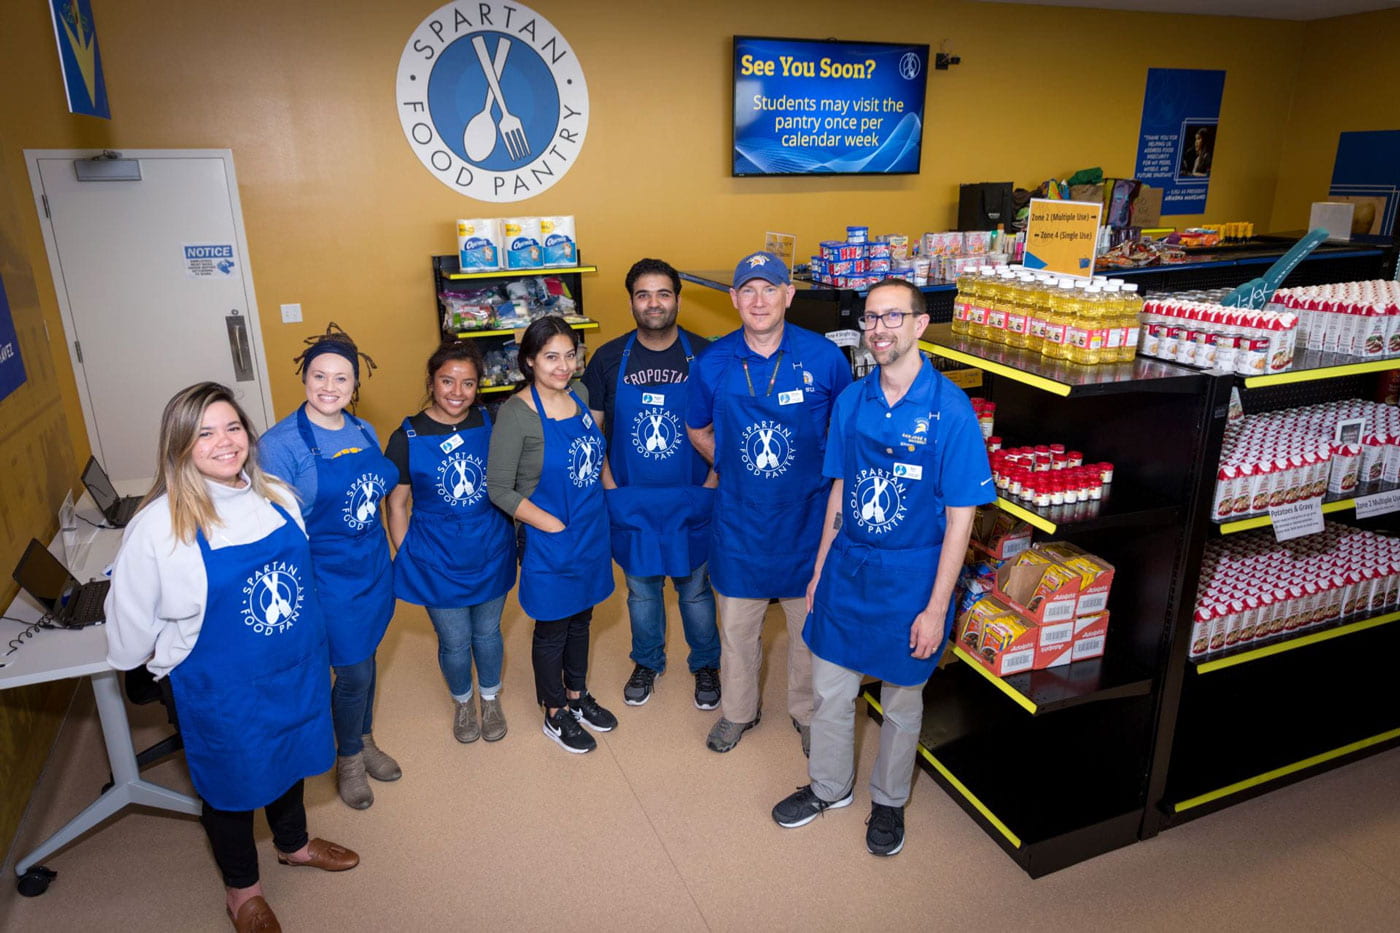 Food Pantry employees in blue aprons.